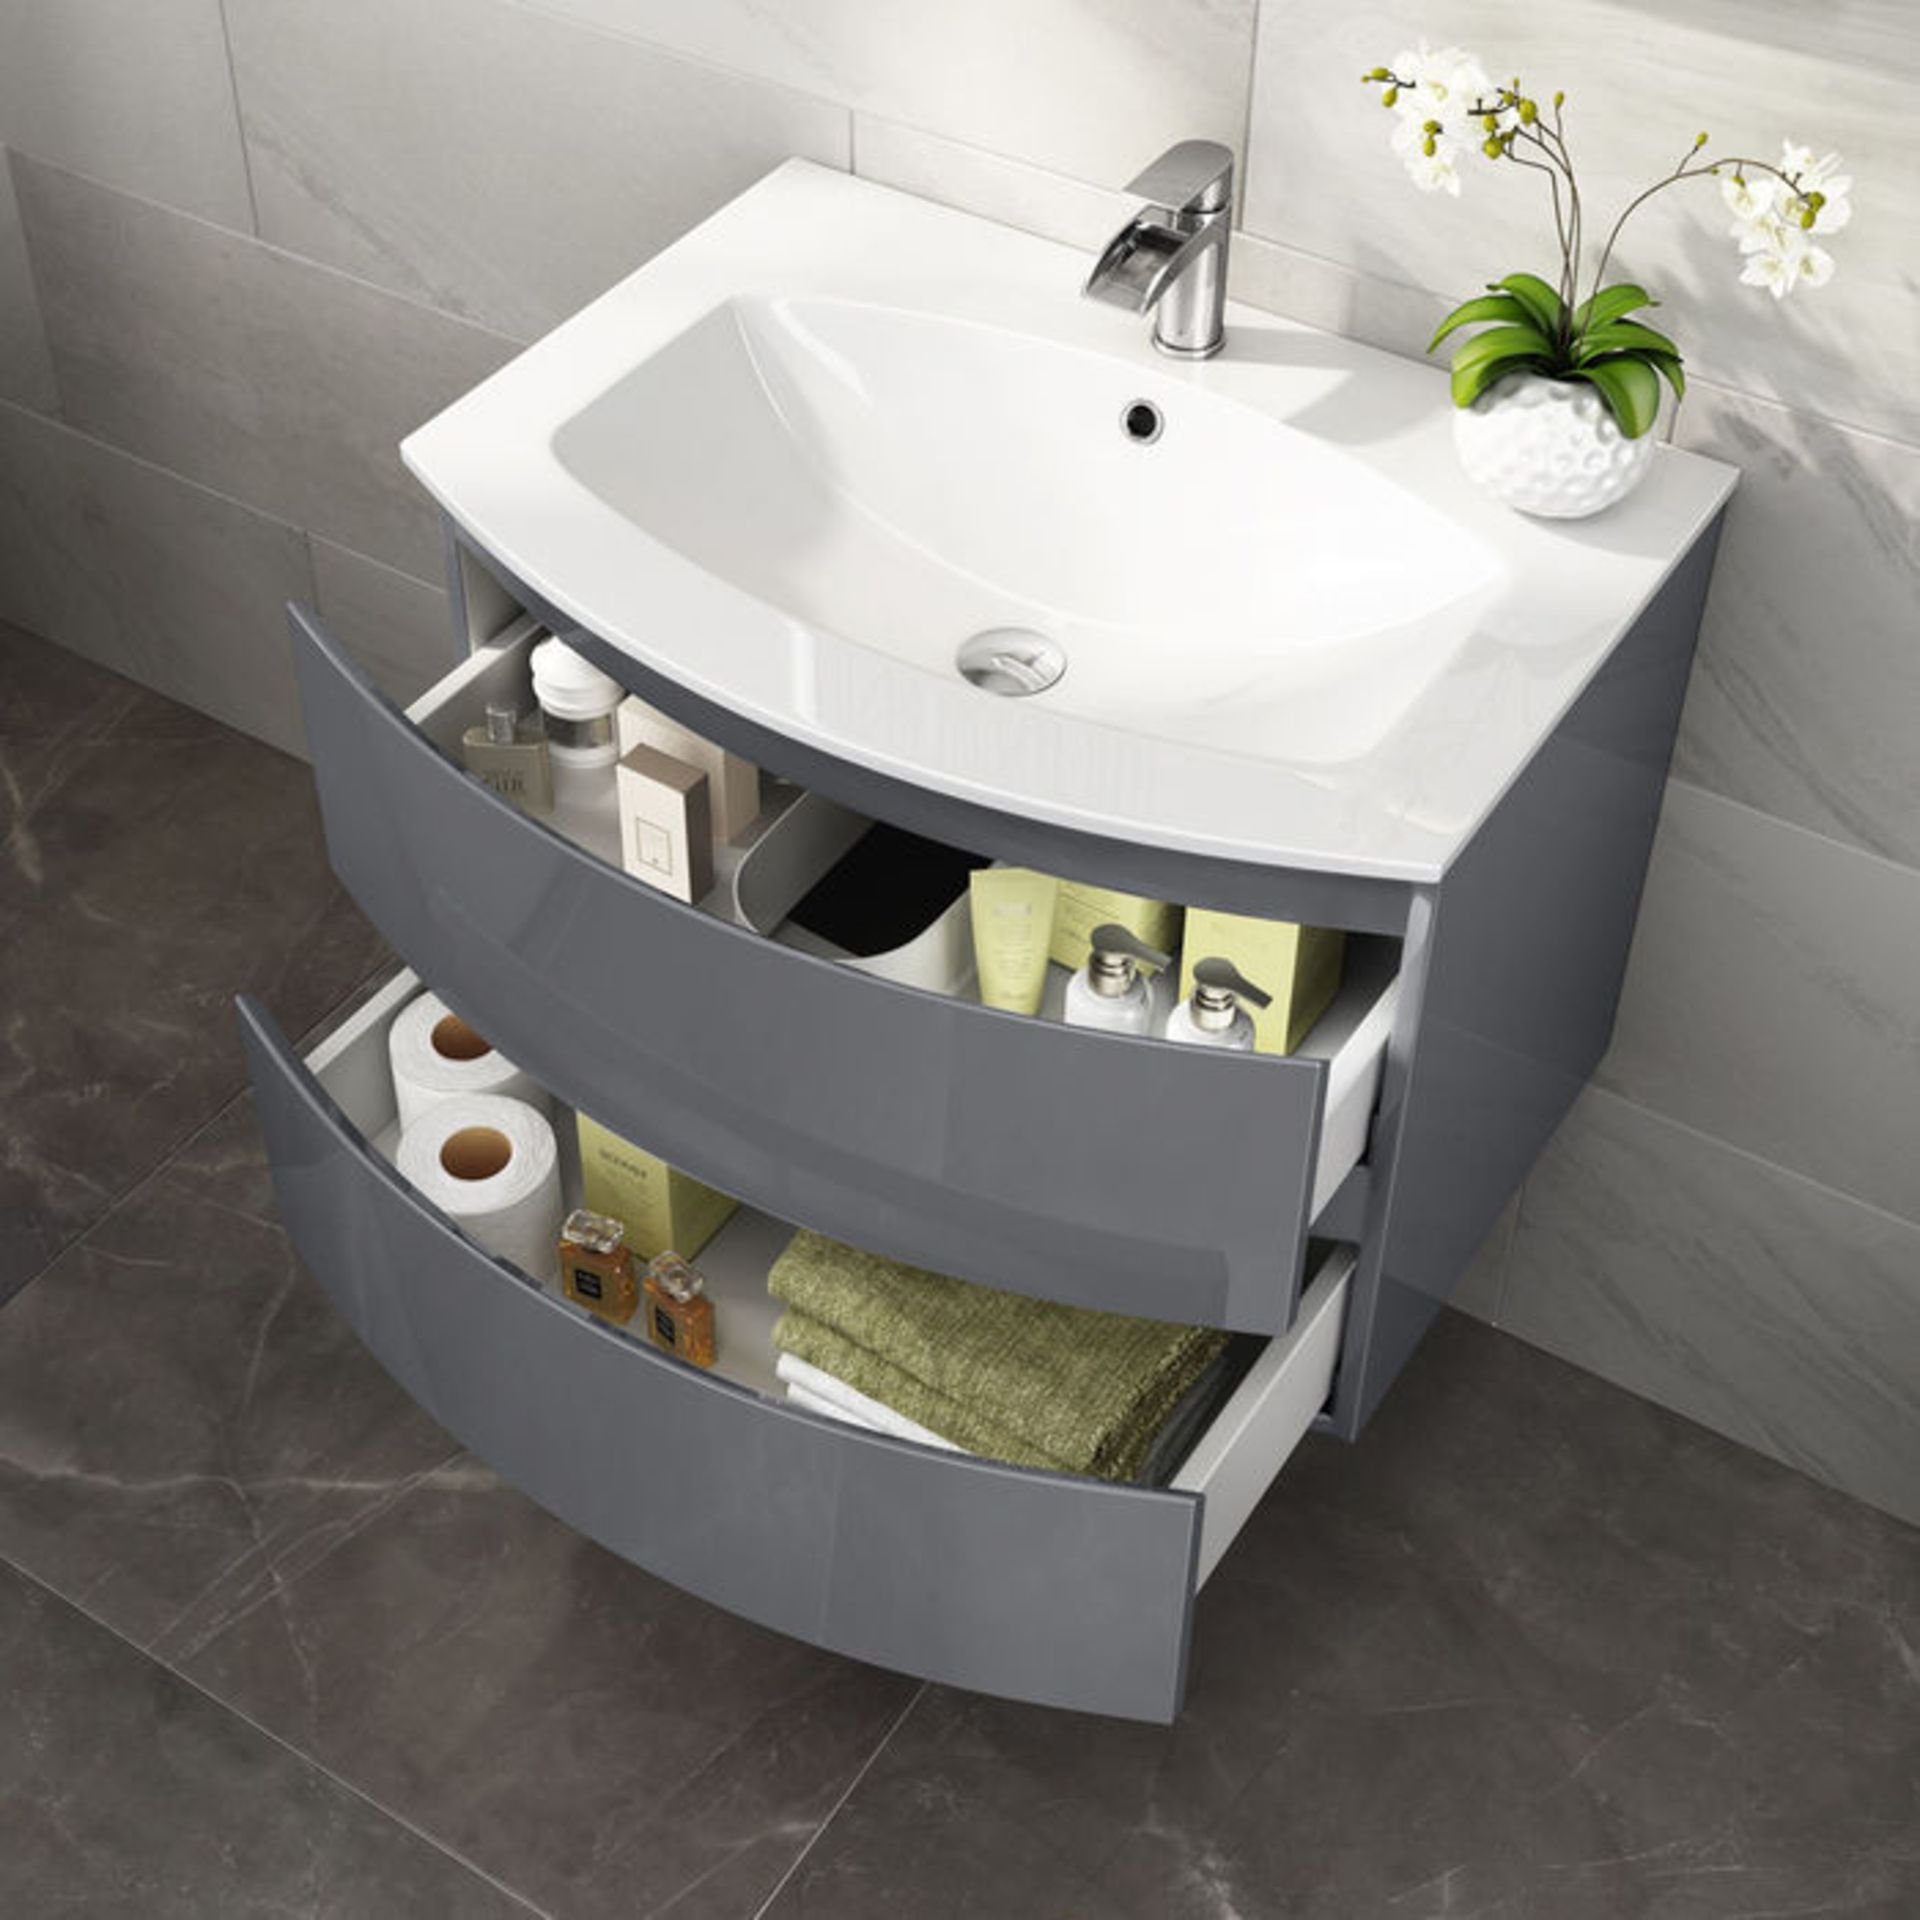 NEW & BOXED 700mm Amelie Gloss Grey Curved Vanity Unit - Wall Hung. RRP £899.99.Comes complet... - Image 2 of 2